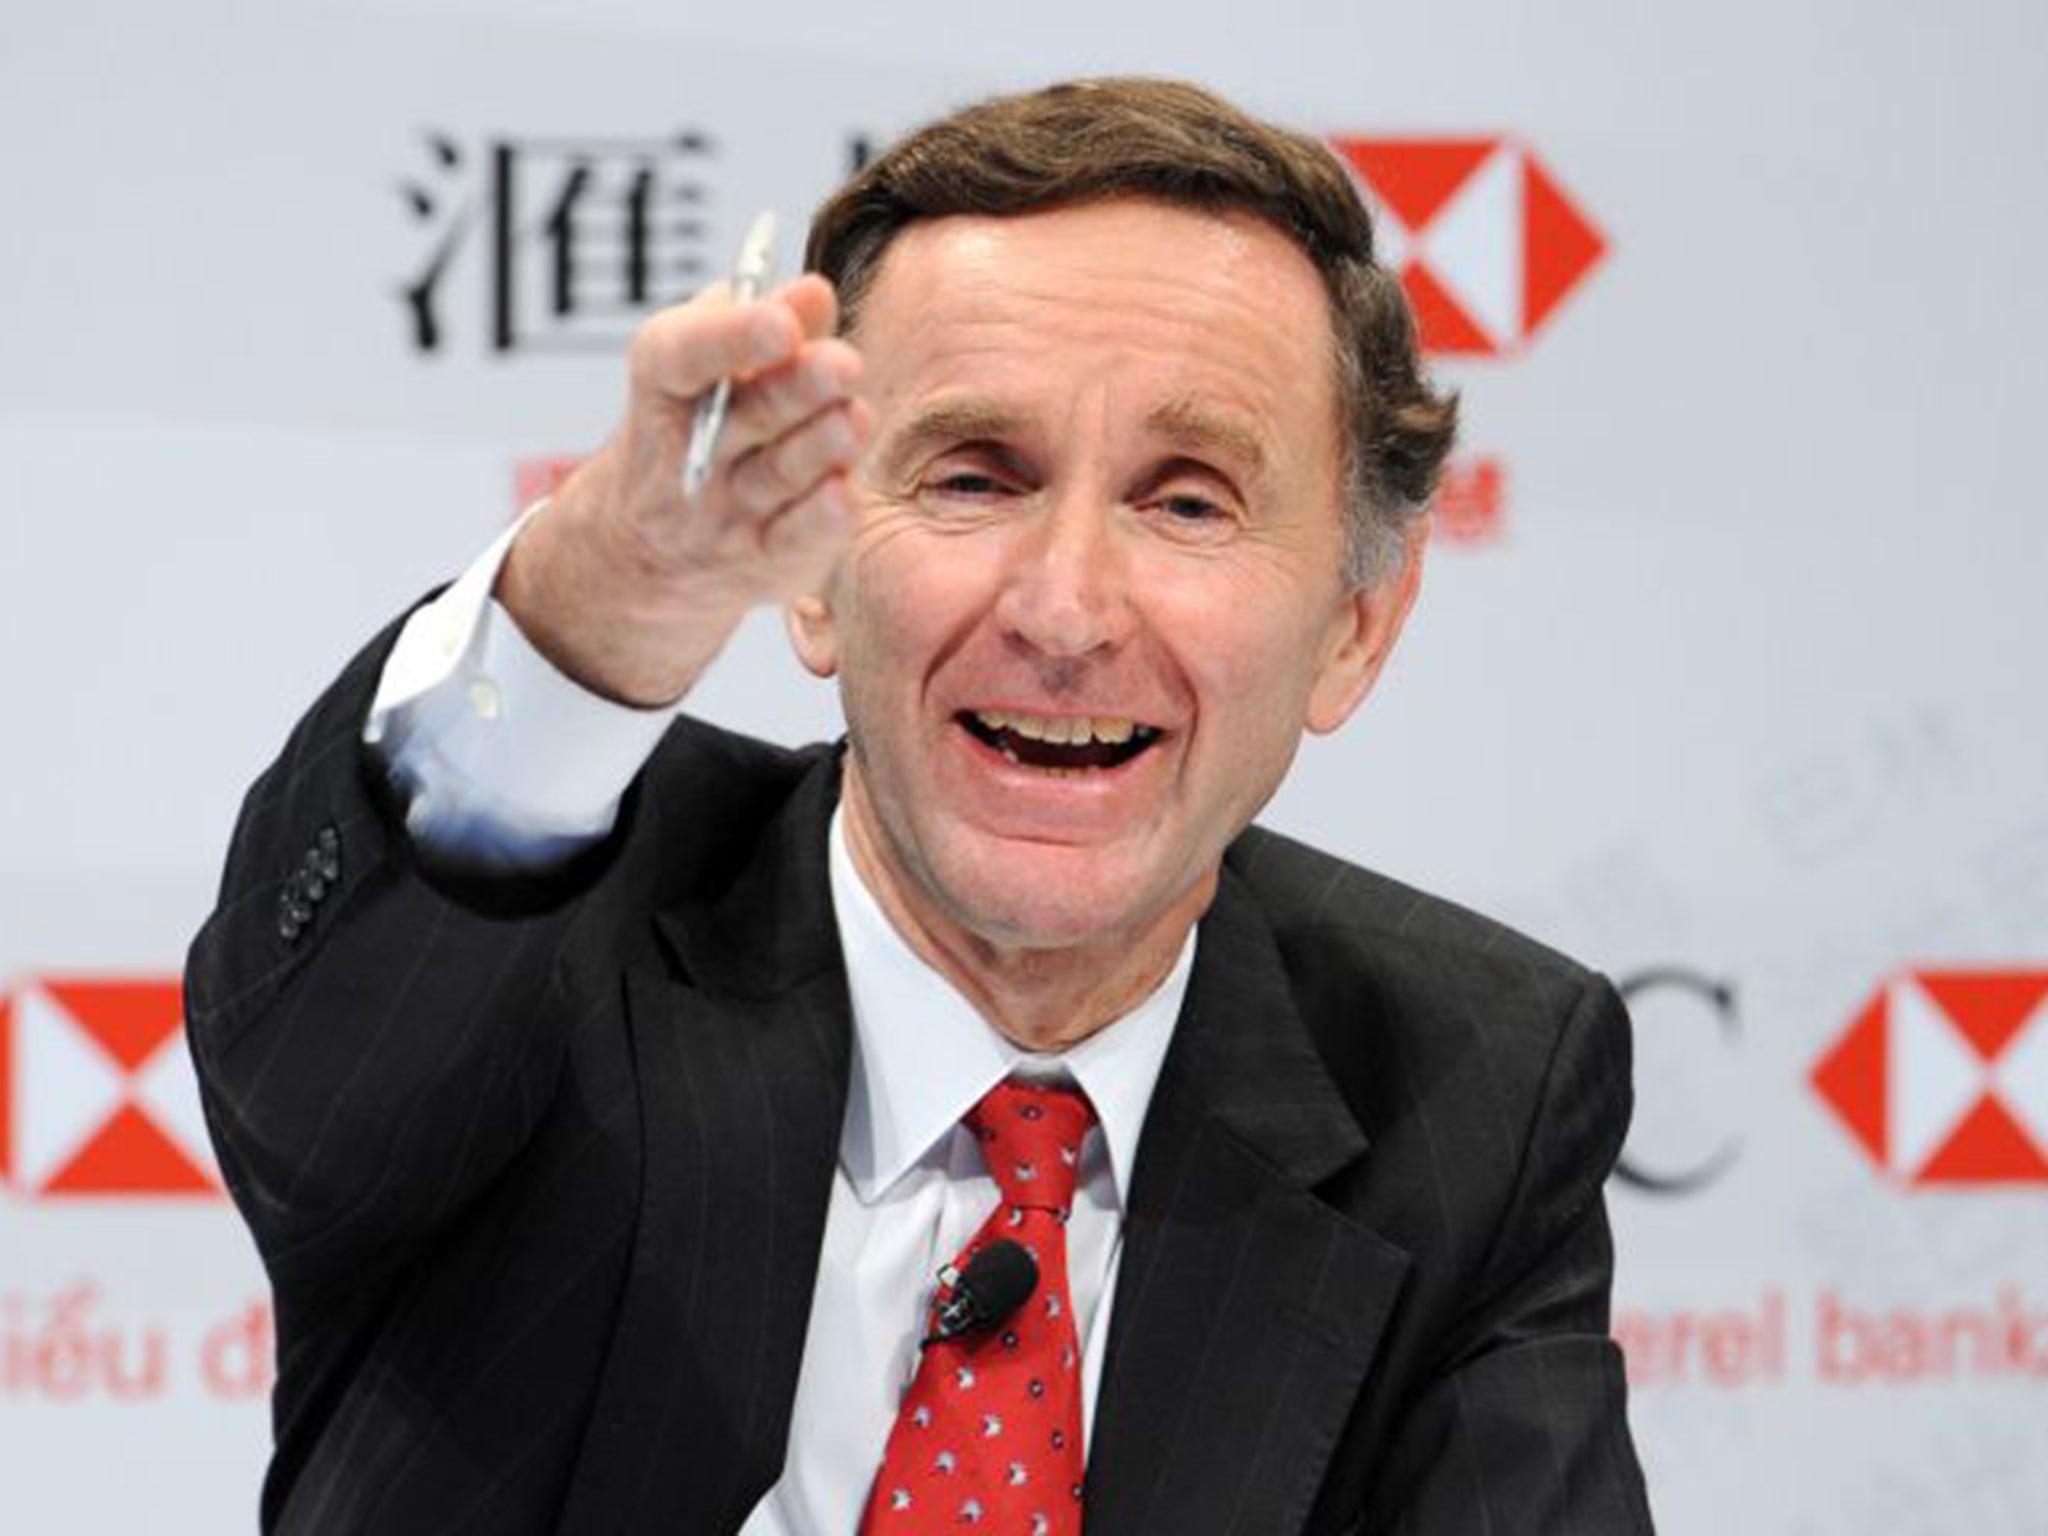 Stephen Green, former chief executive of HSBC, was made a Conservative life peer in 2010